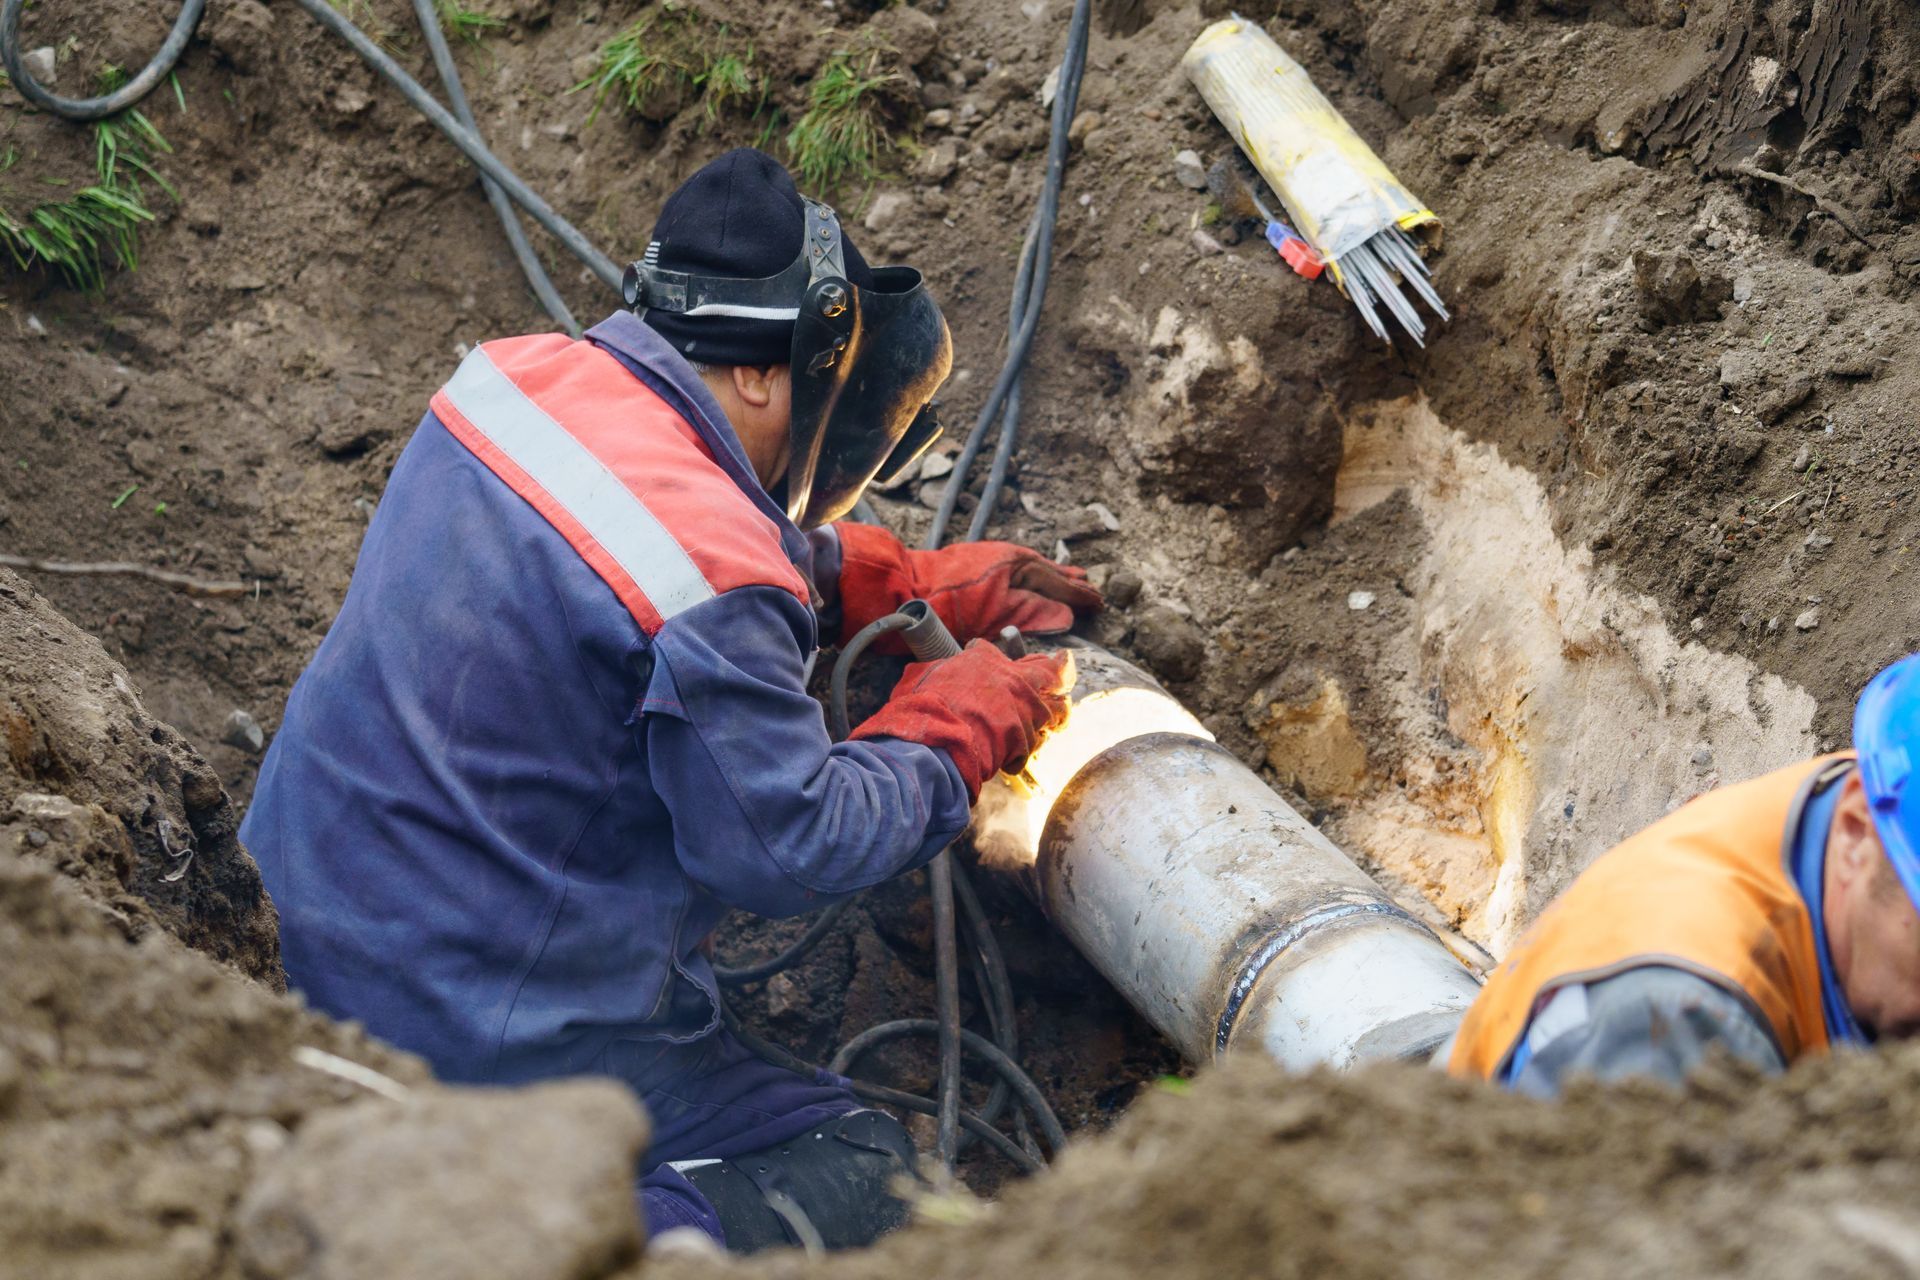 Utility worker welding to repair a broken water main, replacing damaged sections of the water pipe.